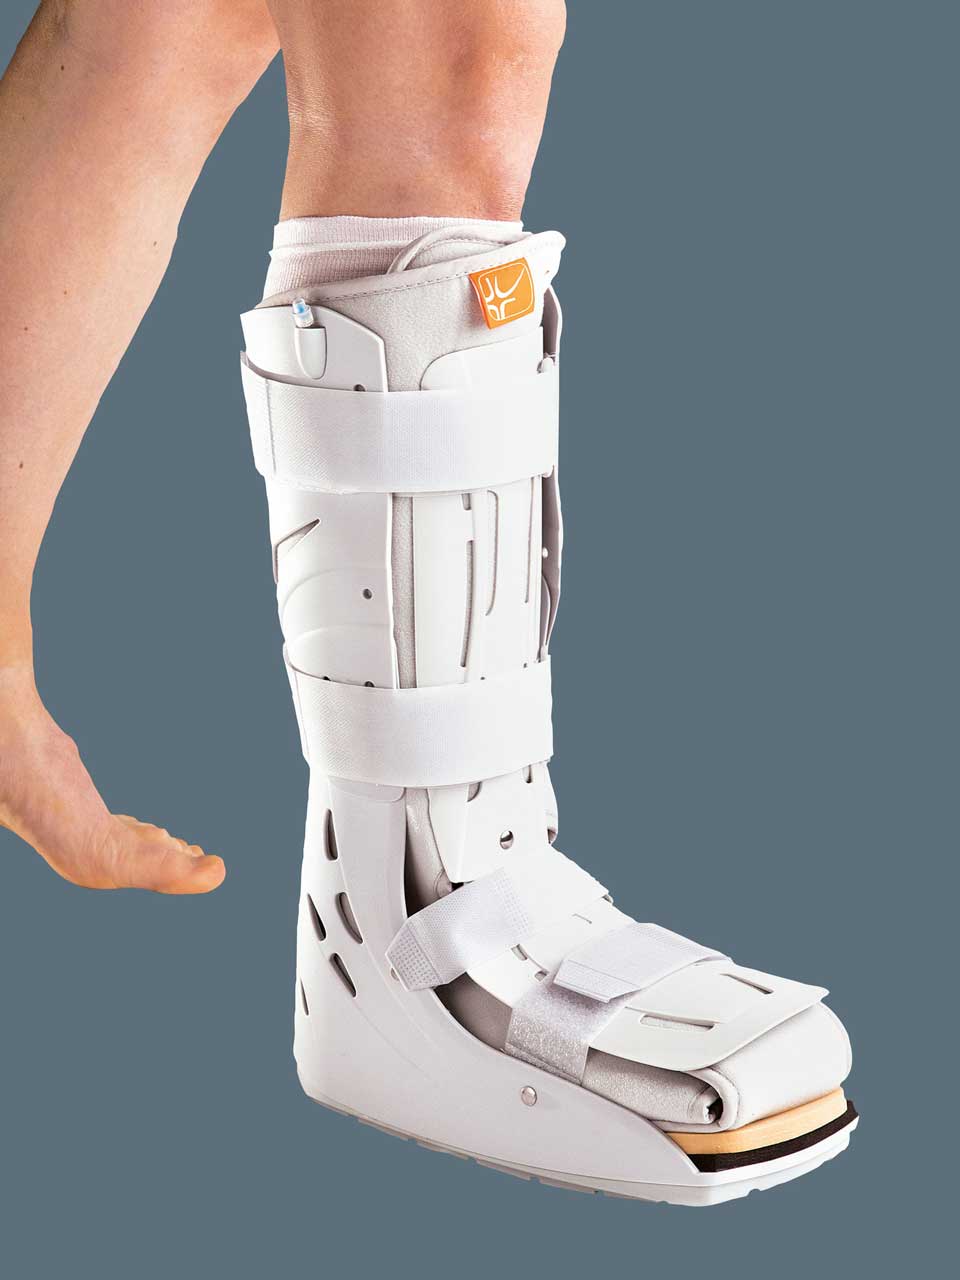 Airstep tight walker Diabetic - Walker with two inflatable air paddings 